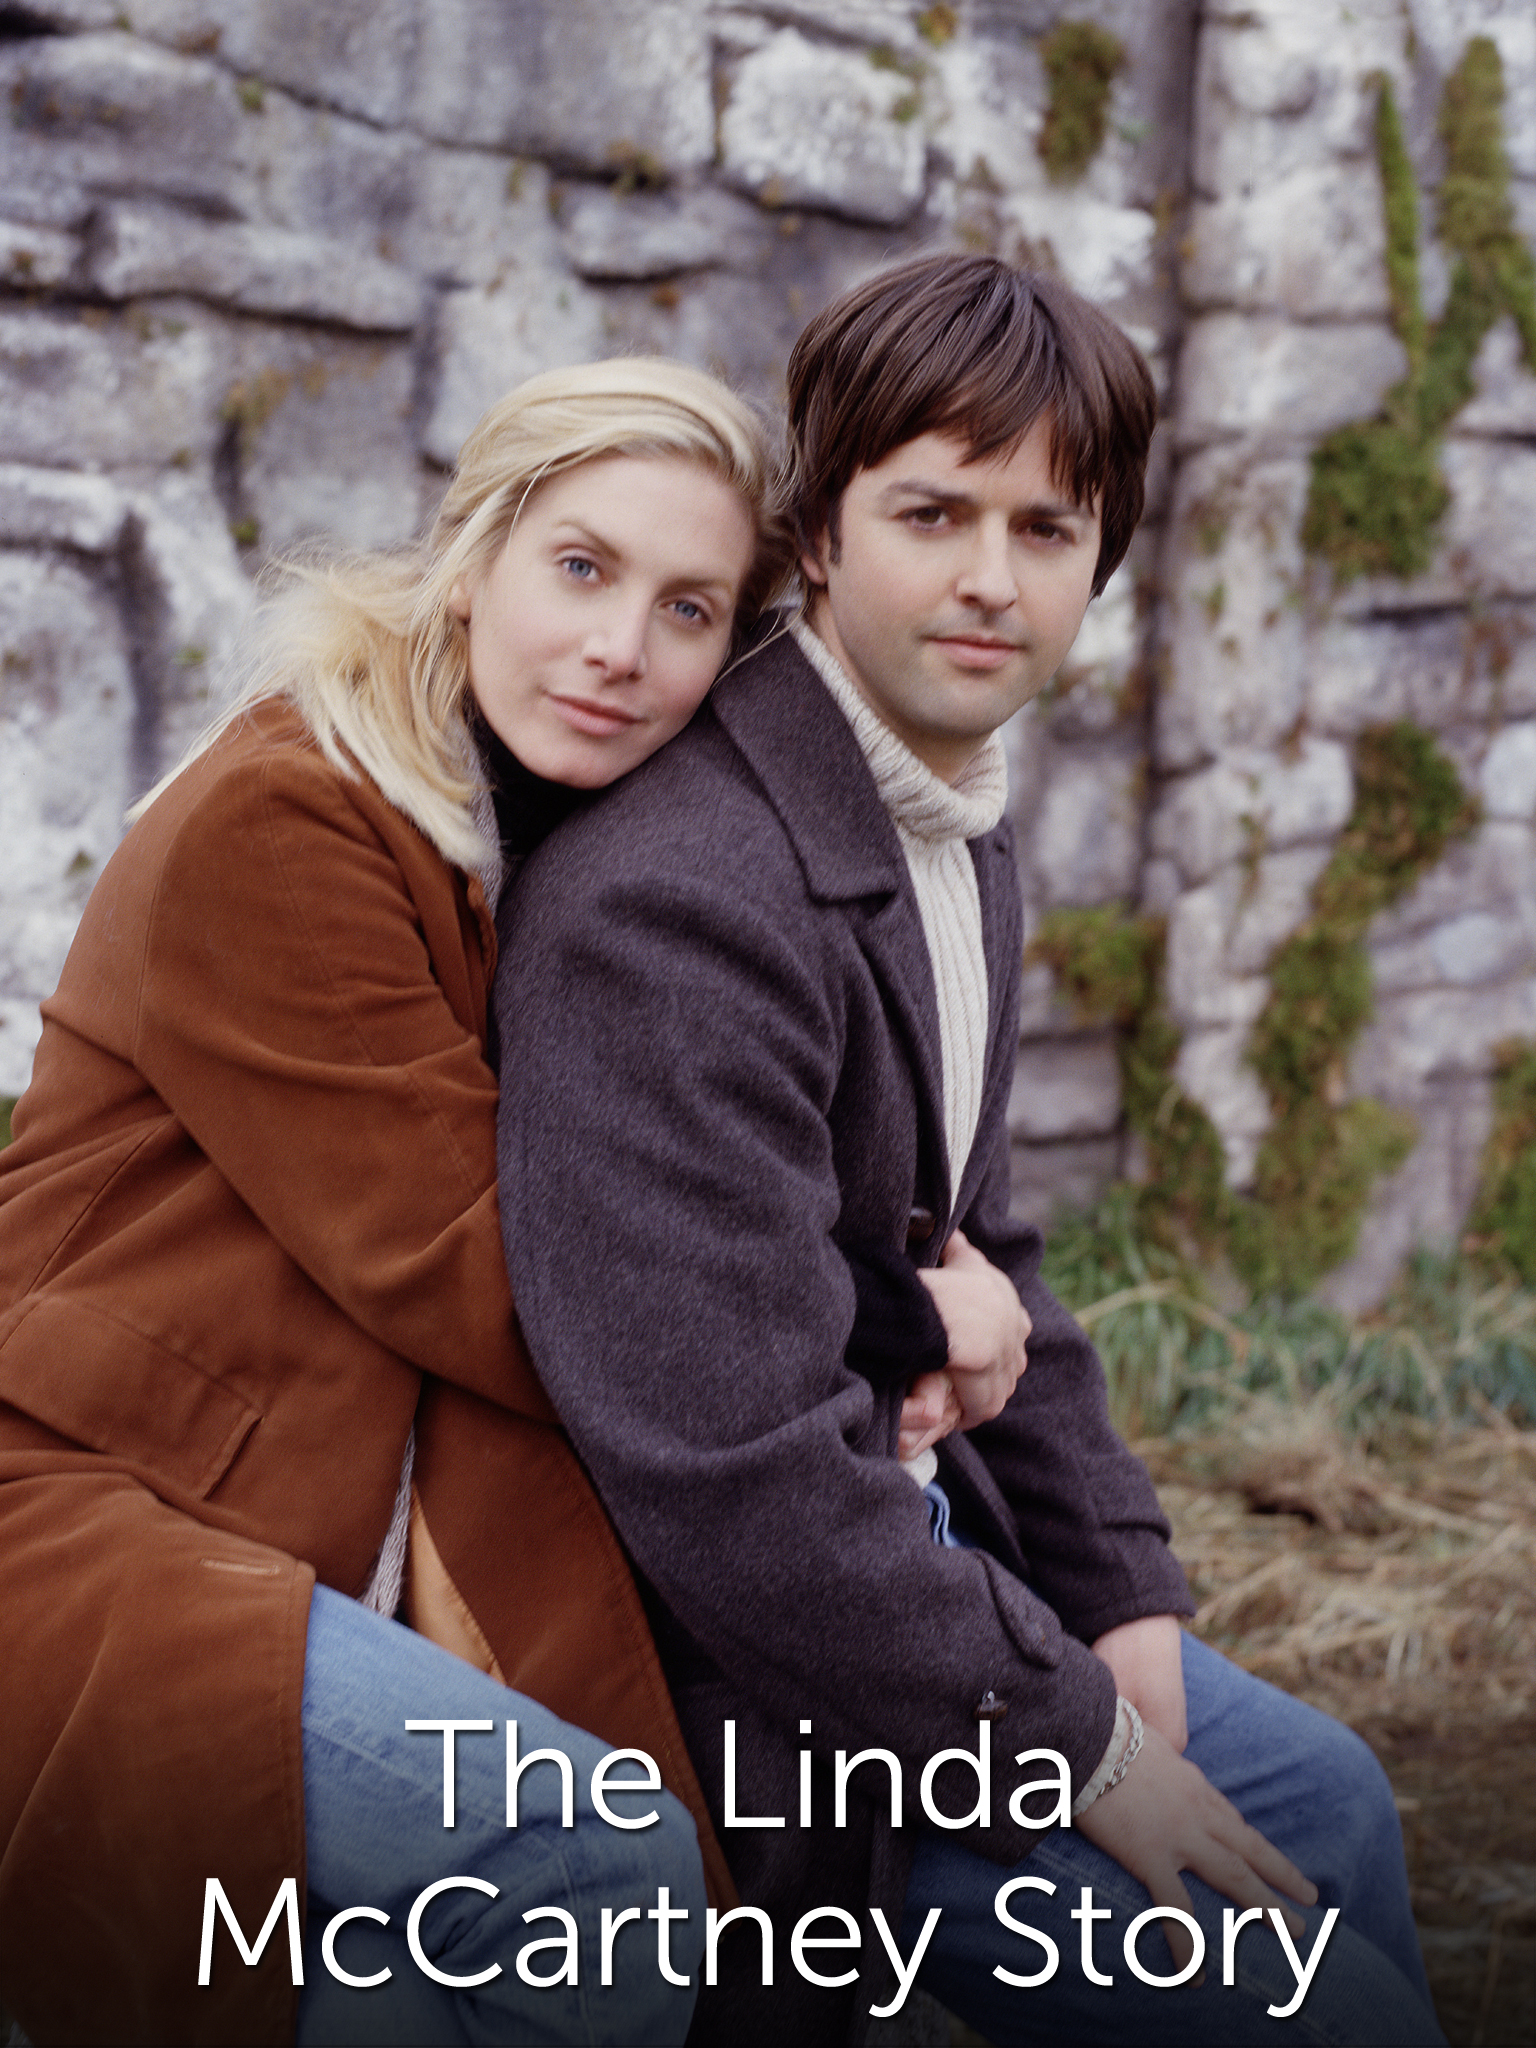 The Linda McCartney Story - Where to Watch and Stream - TV Guide